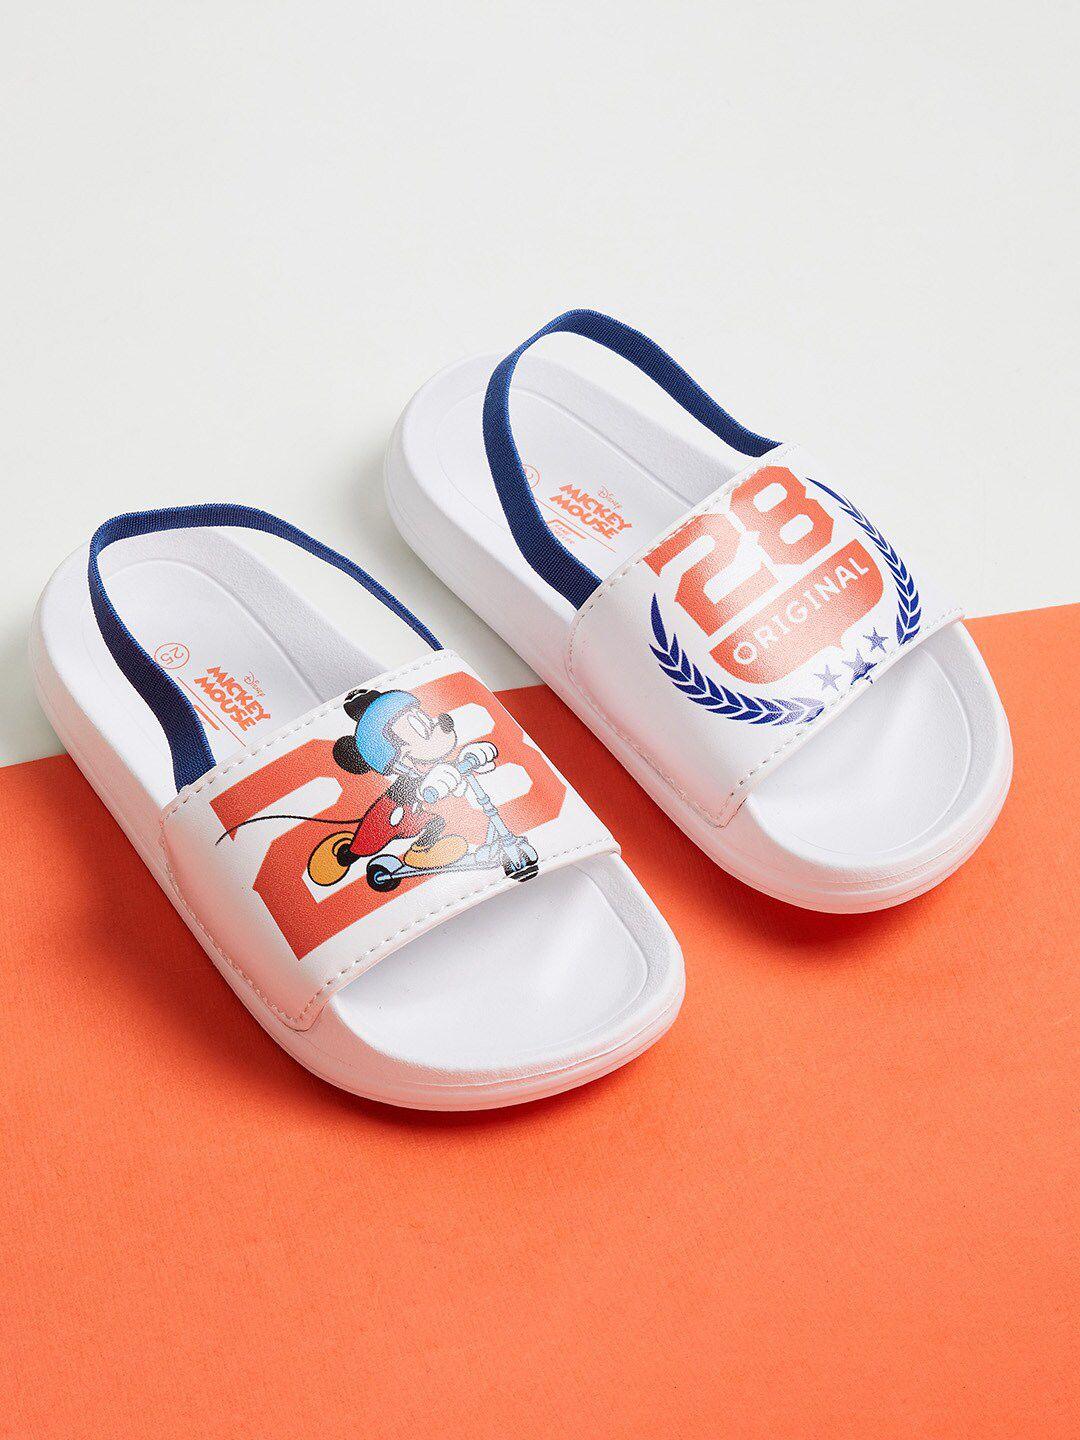 fame-forever-by-lifestyle-boys-printed-sliders